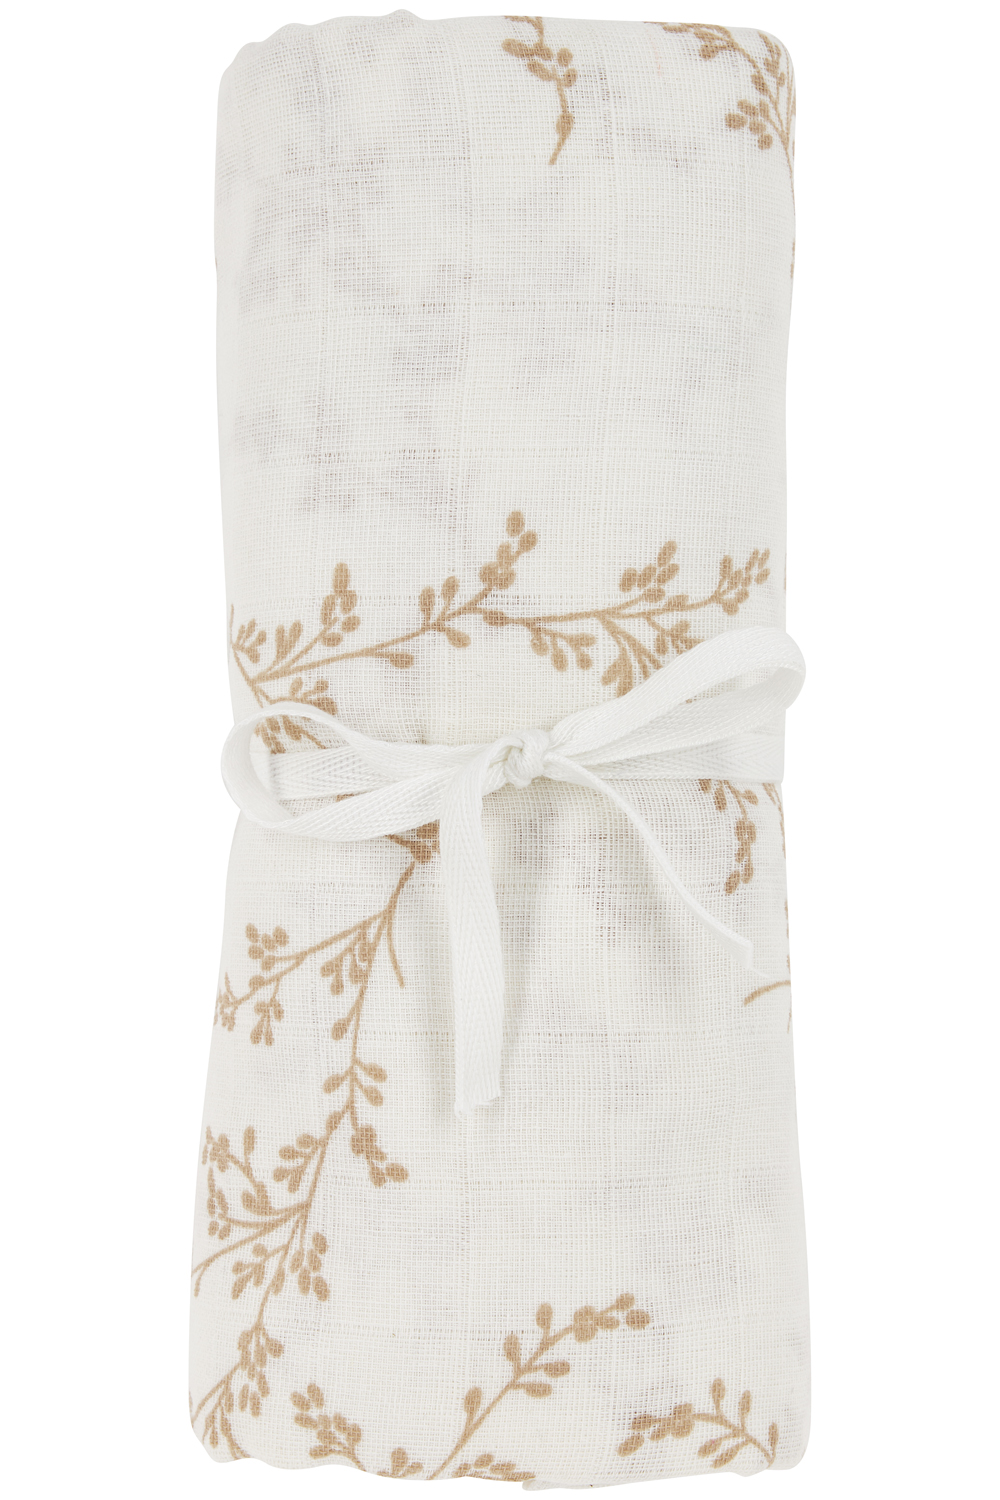 Swaddle XL muslin Branches - sand - 140x200cm